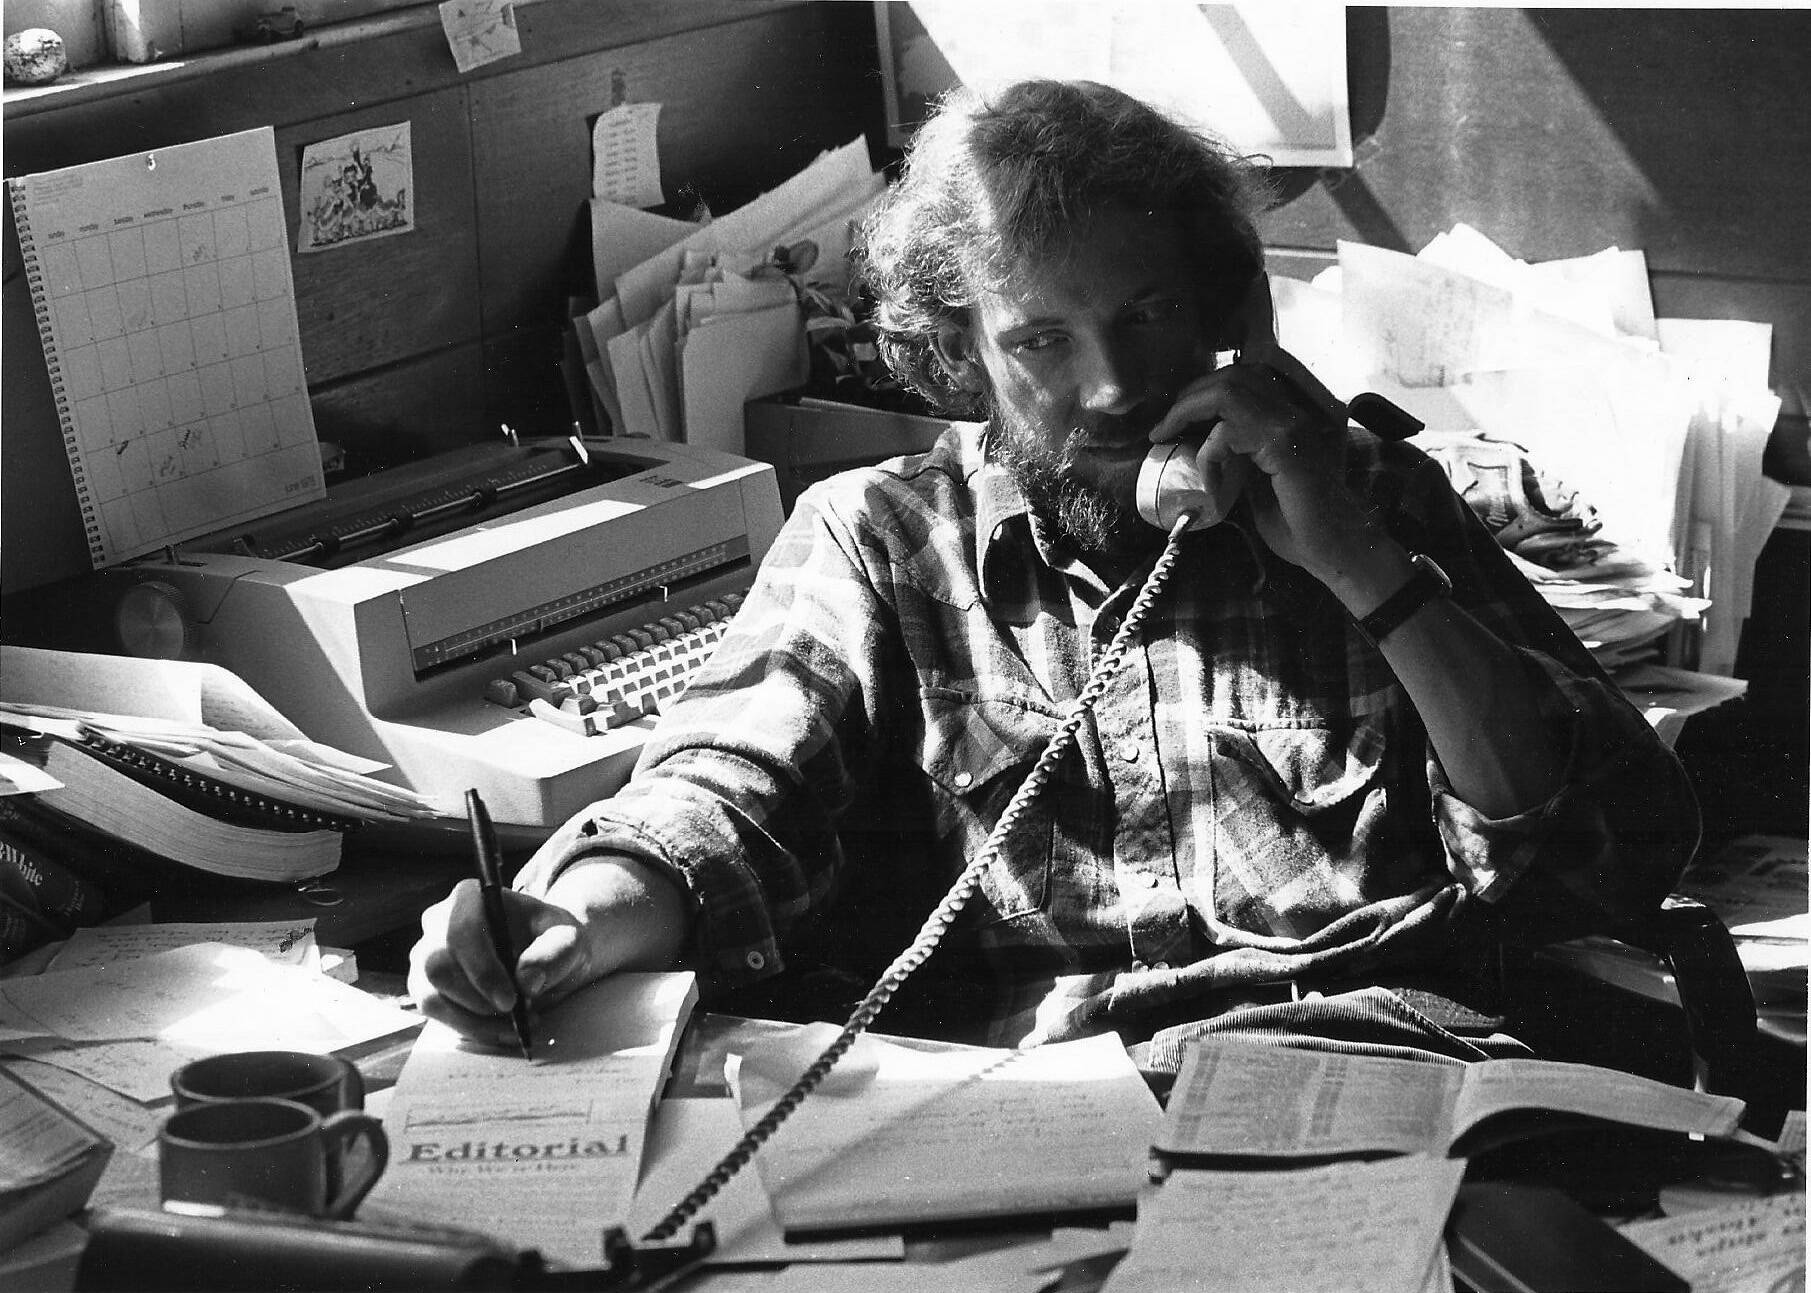 Tom Kizzia works at the Homer News in a photo taken about 1978 in Homer, Alaska. (Homer News photo)